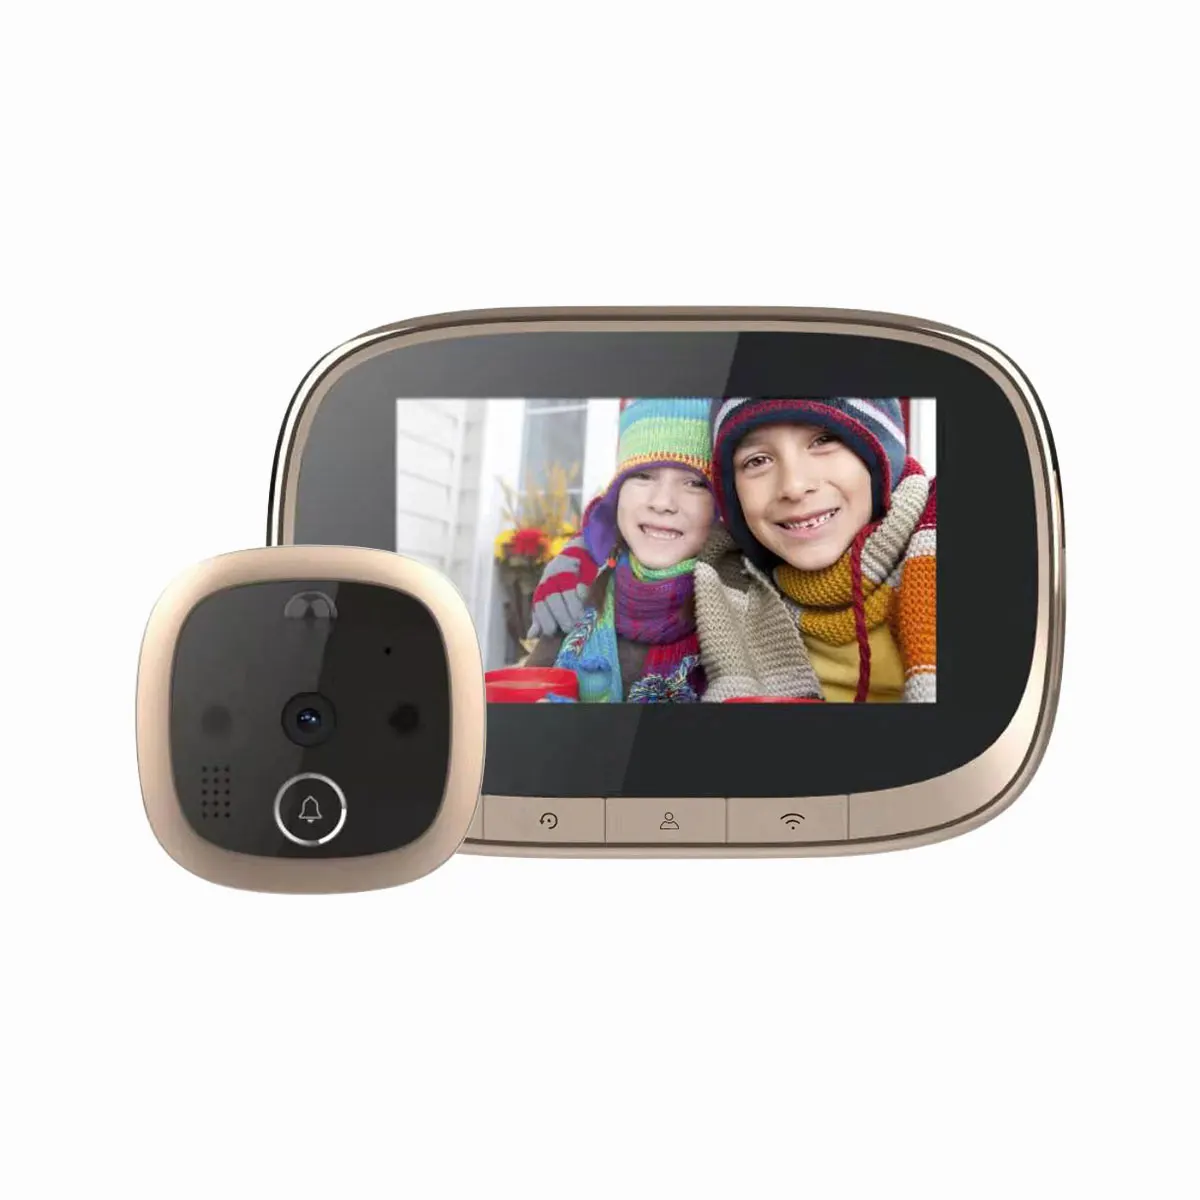 C80 4.3" LCD Smart WiFi Video Doorbell Peephole Doorbell Viewer Home PIR Motion Detection Security Monitor Two-Way Voice